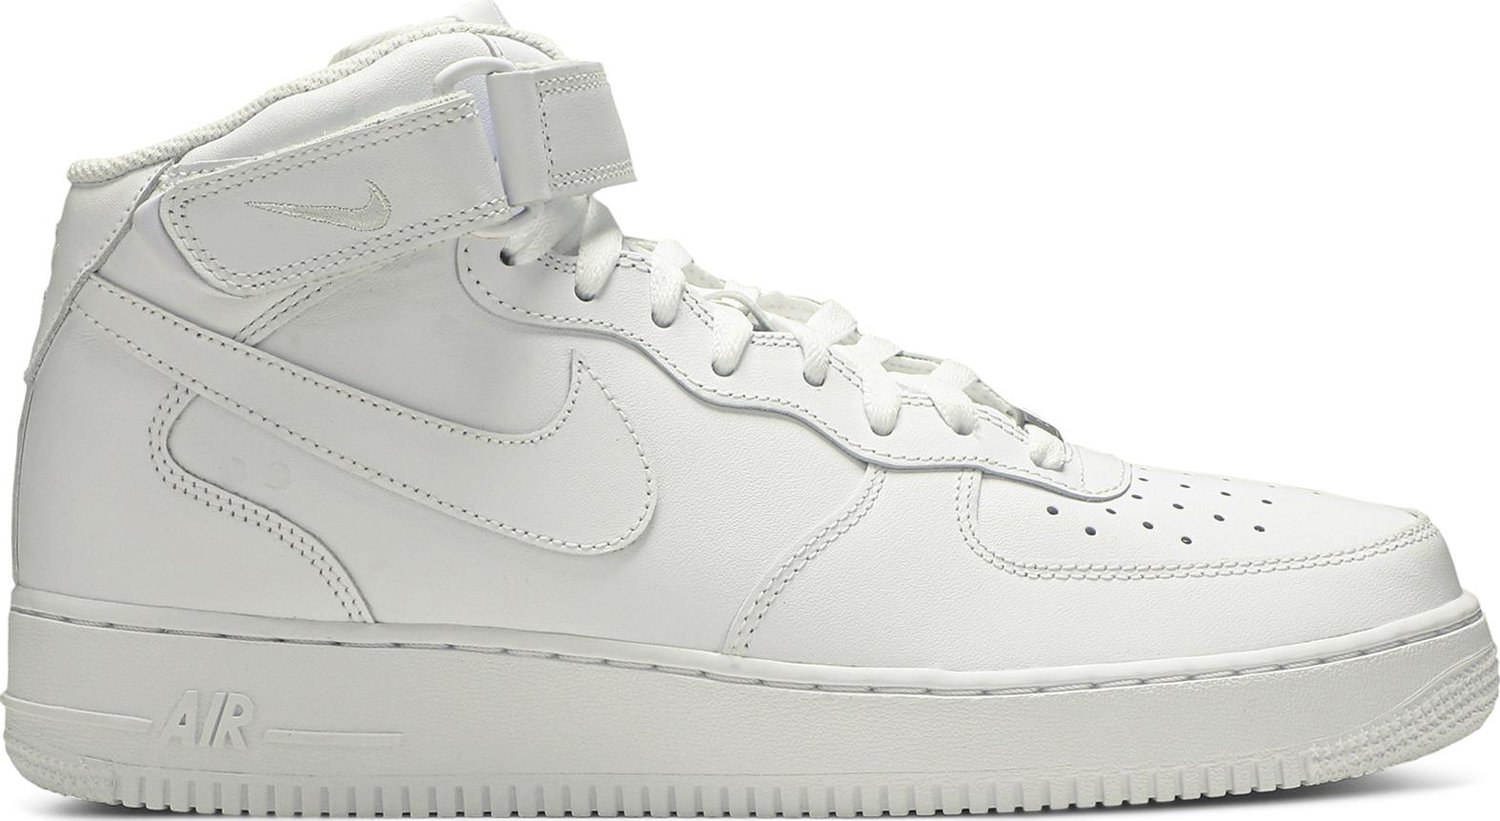 Buy Air Force 1 Mid '07 'White' - 315123 111 | GOAT